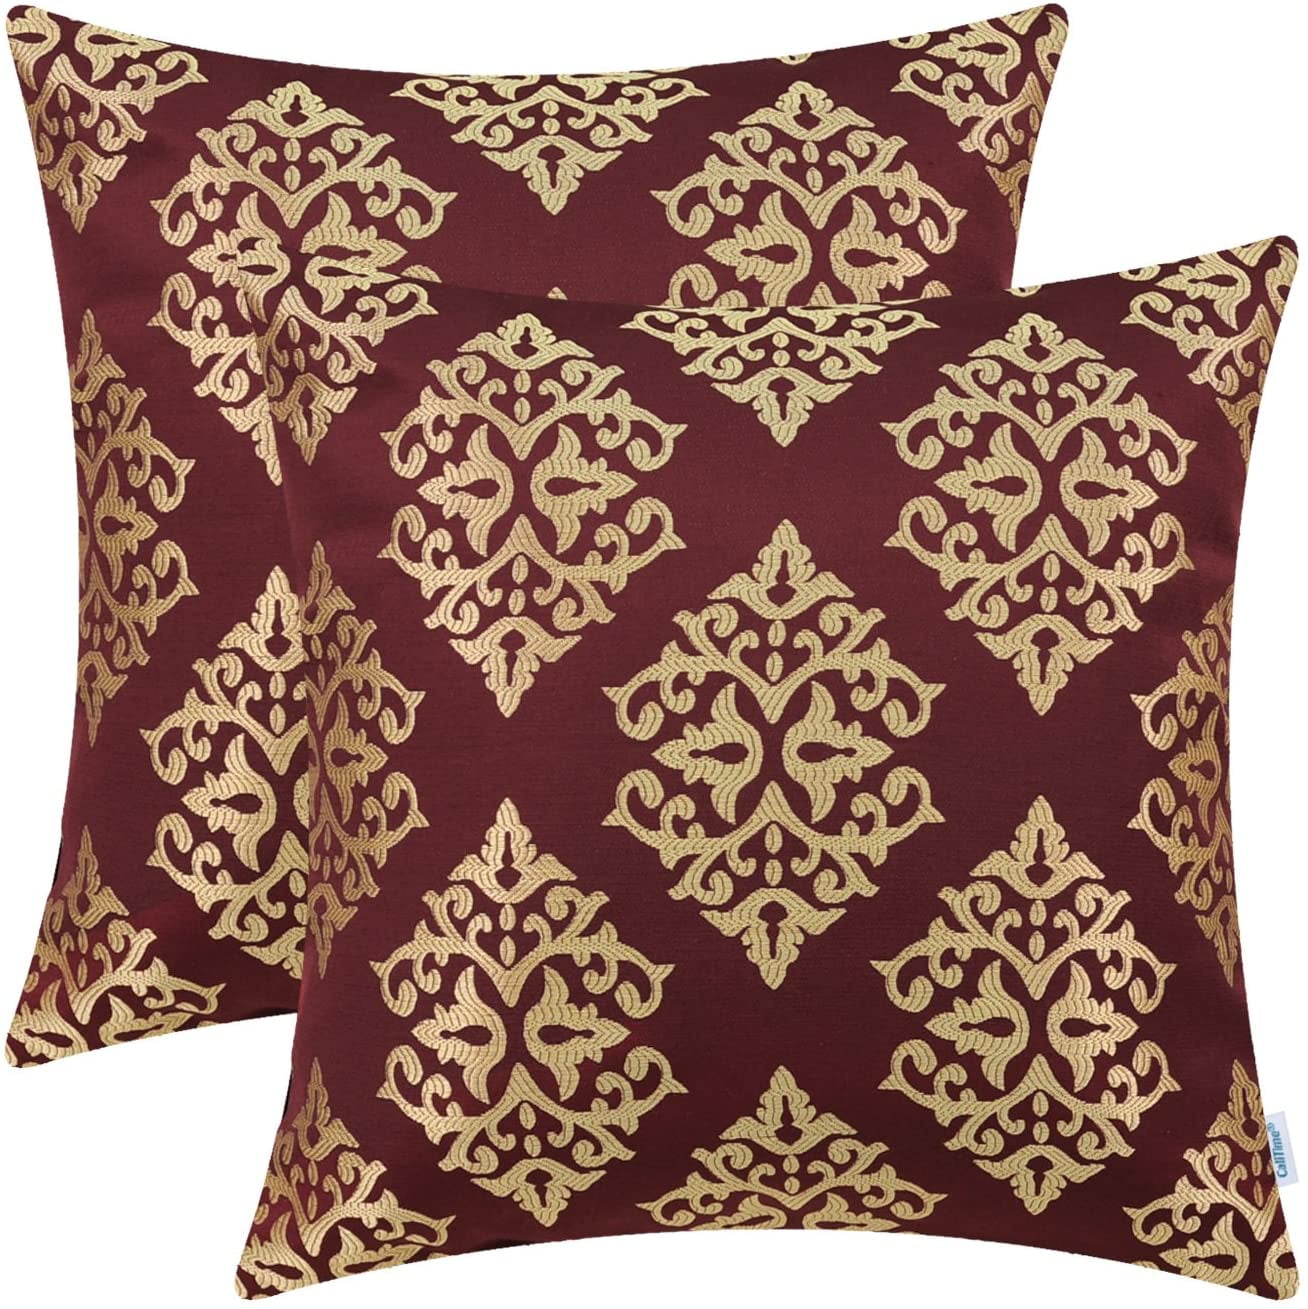 Jacquard Throw Pillows Covers Cases Couch Sofa Home Decor Damask Floral 18 x 18"